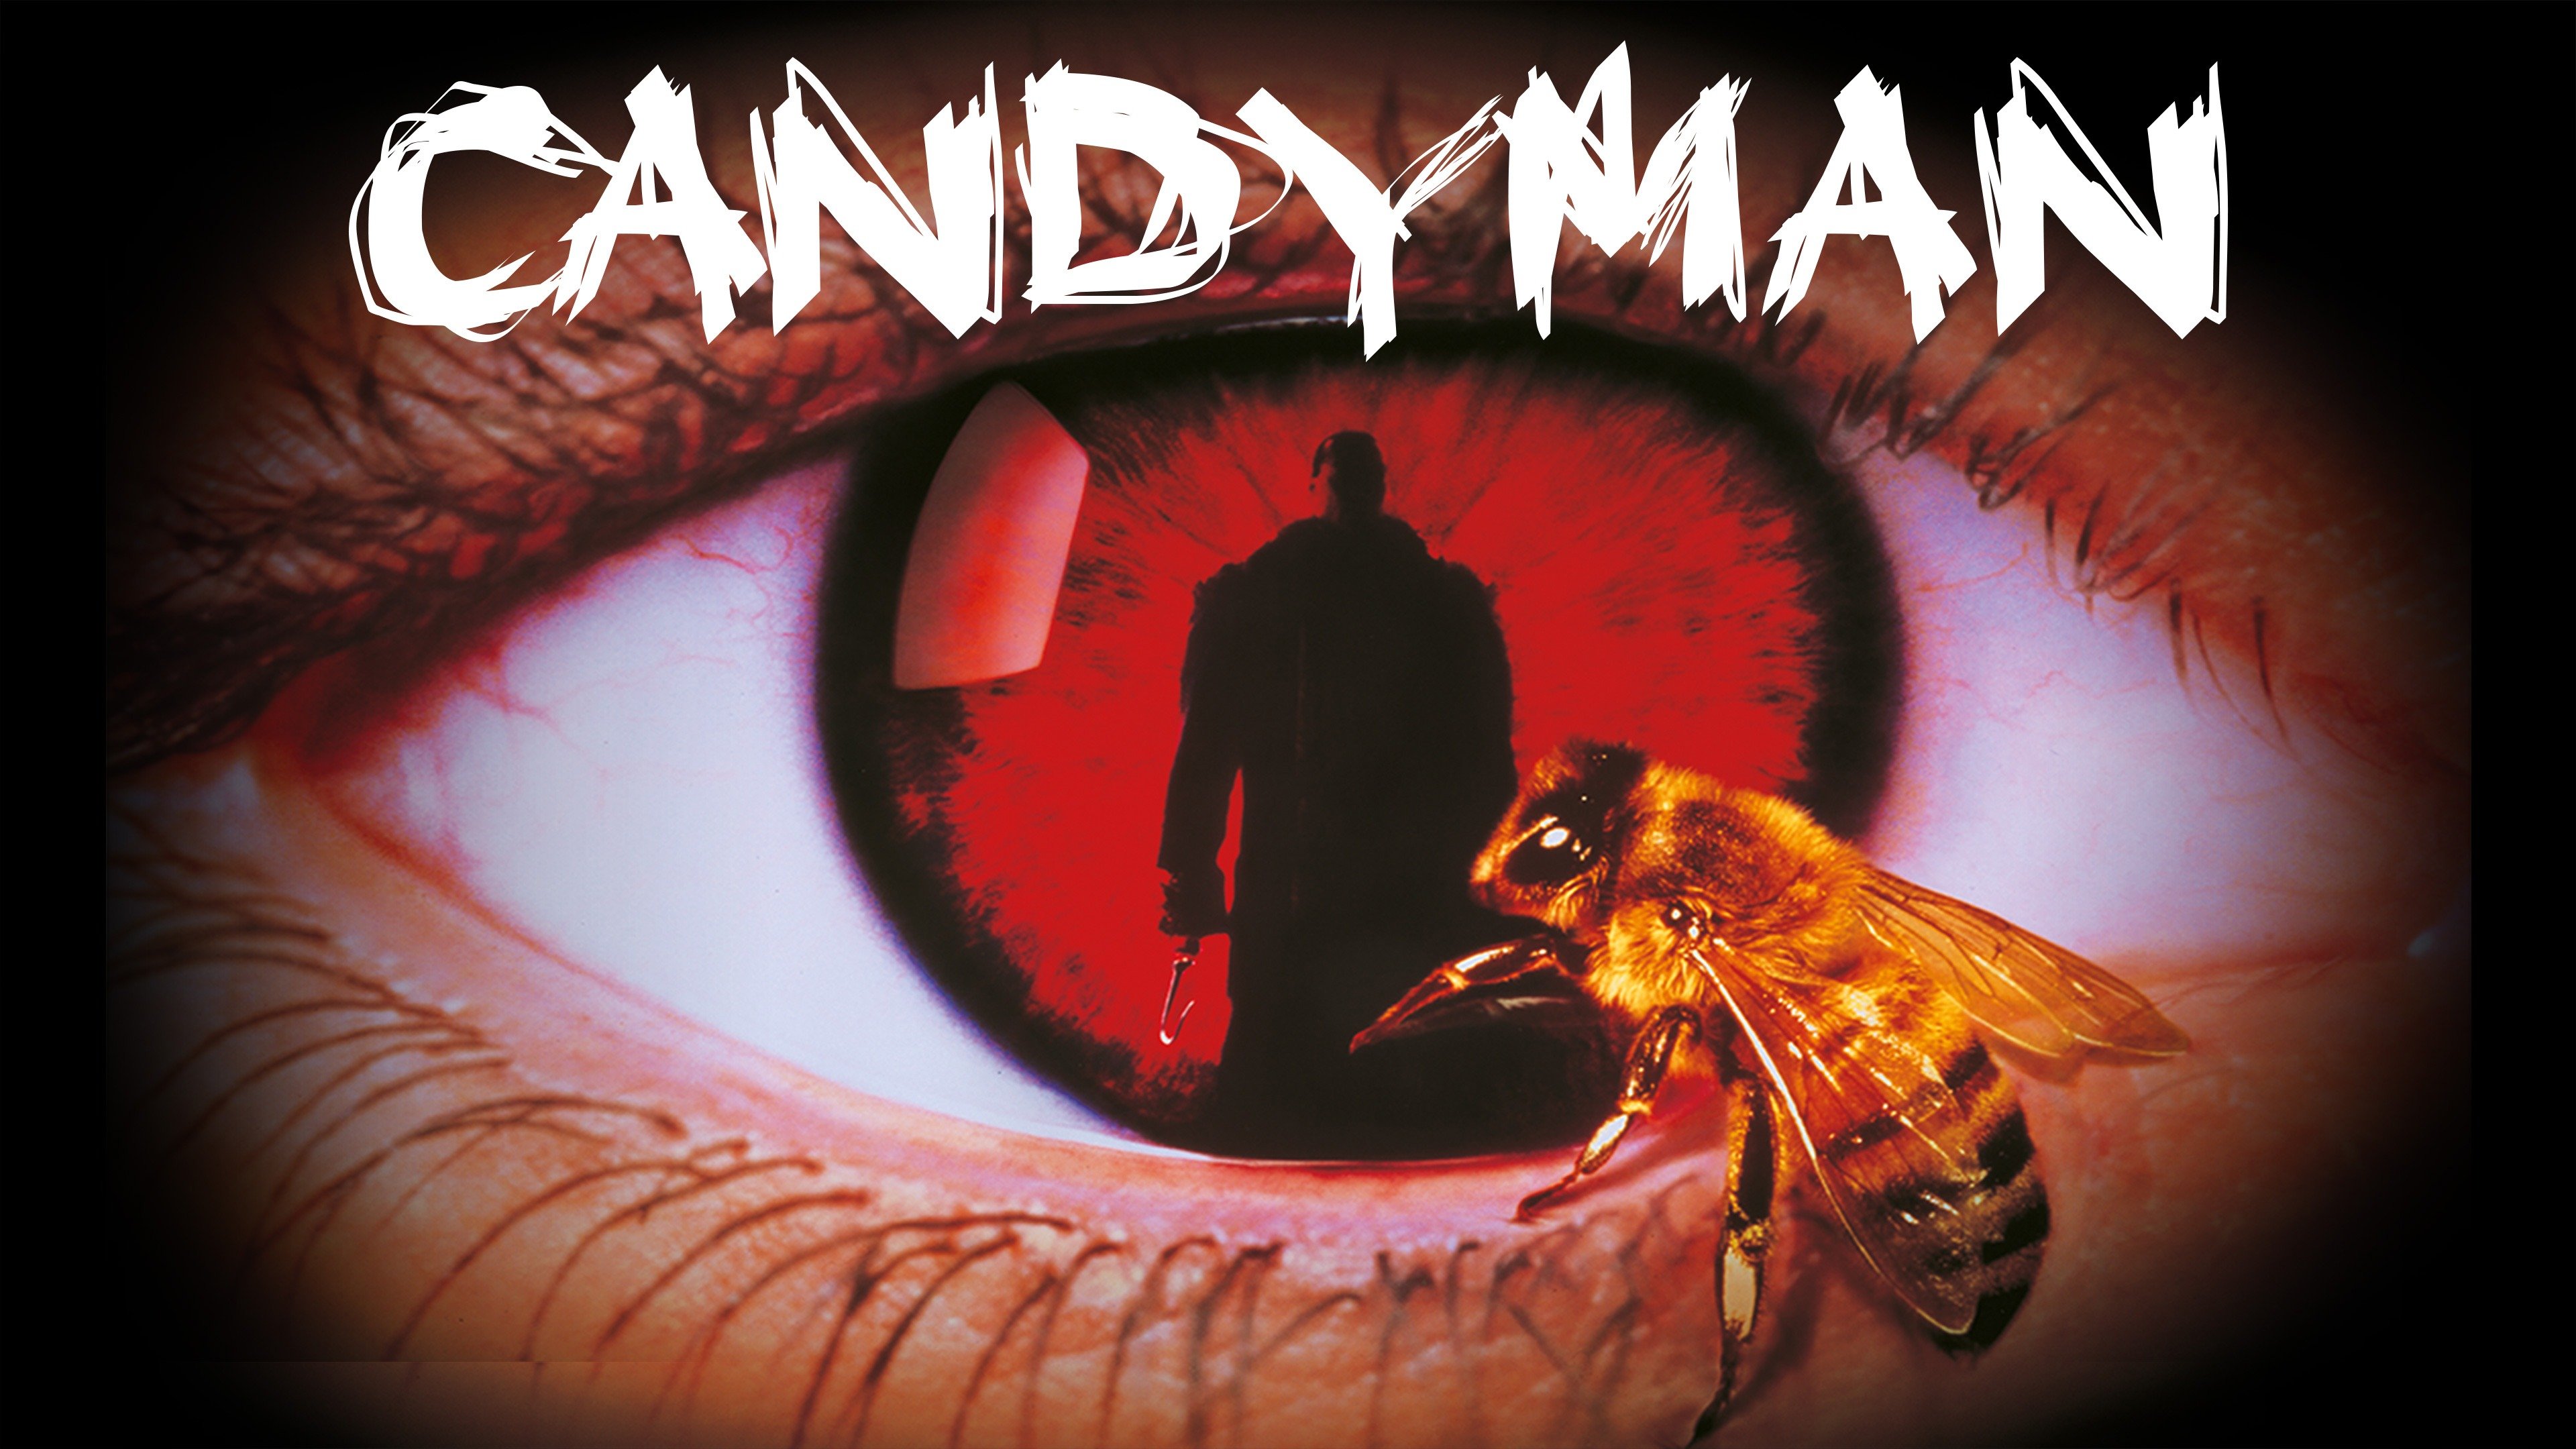 Candyman Audience Reviews